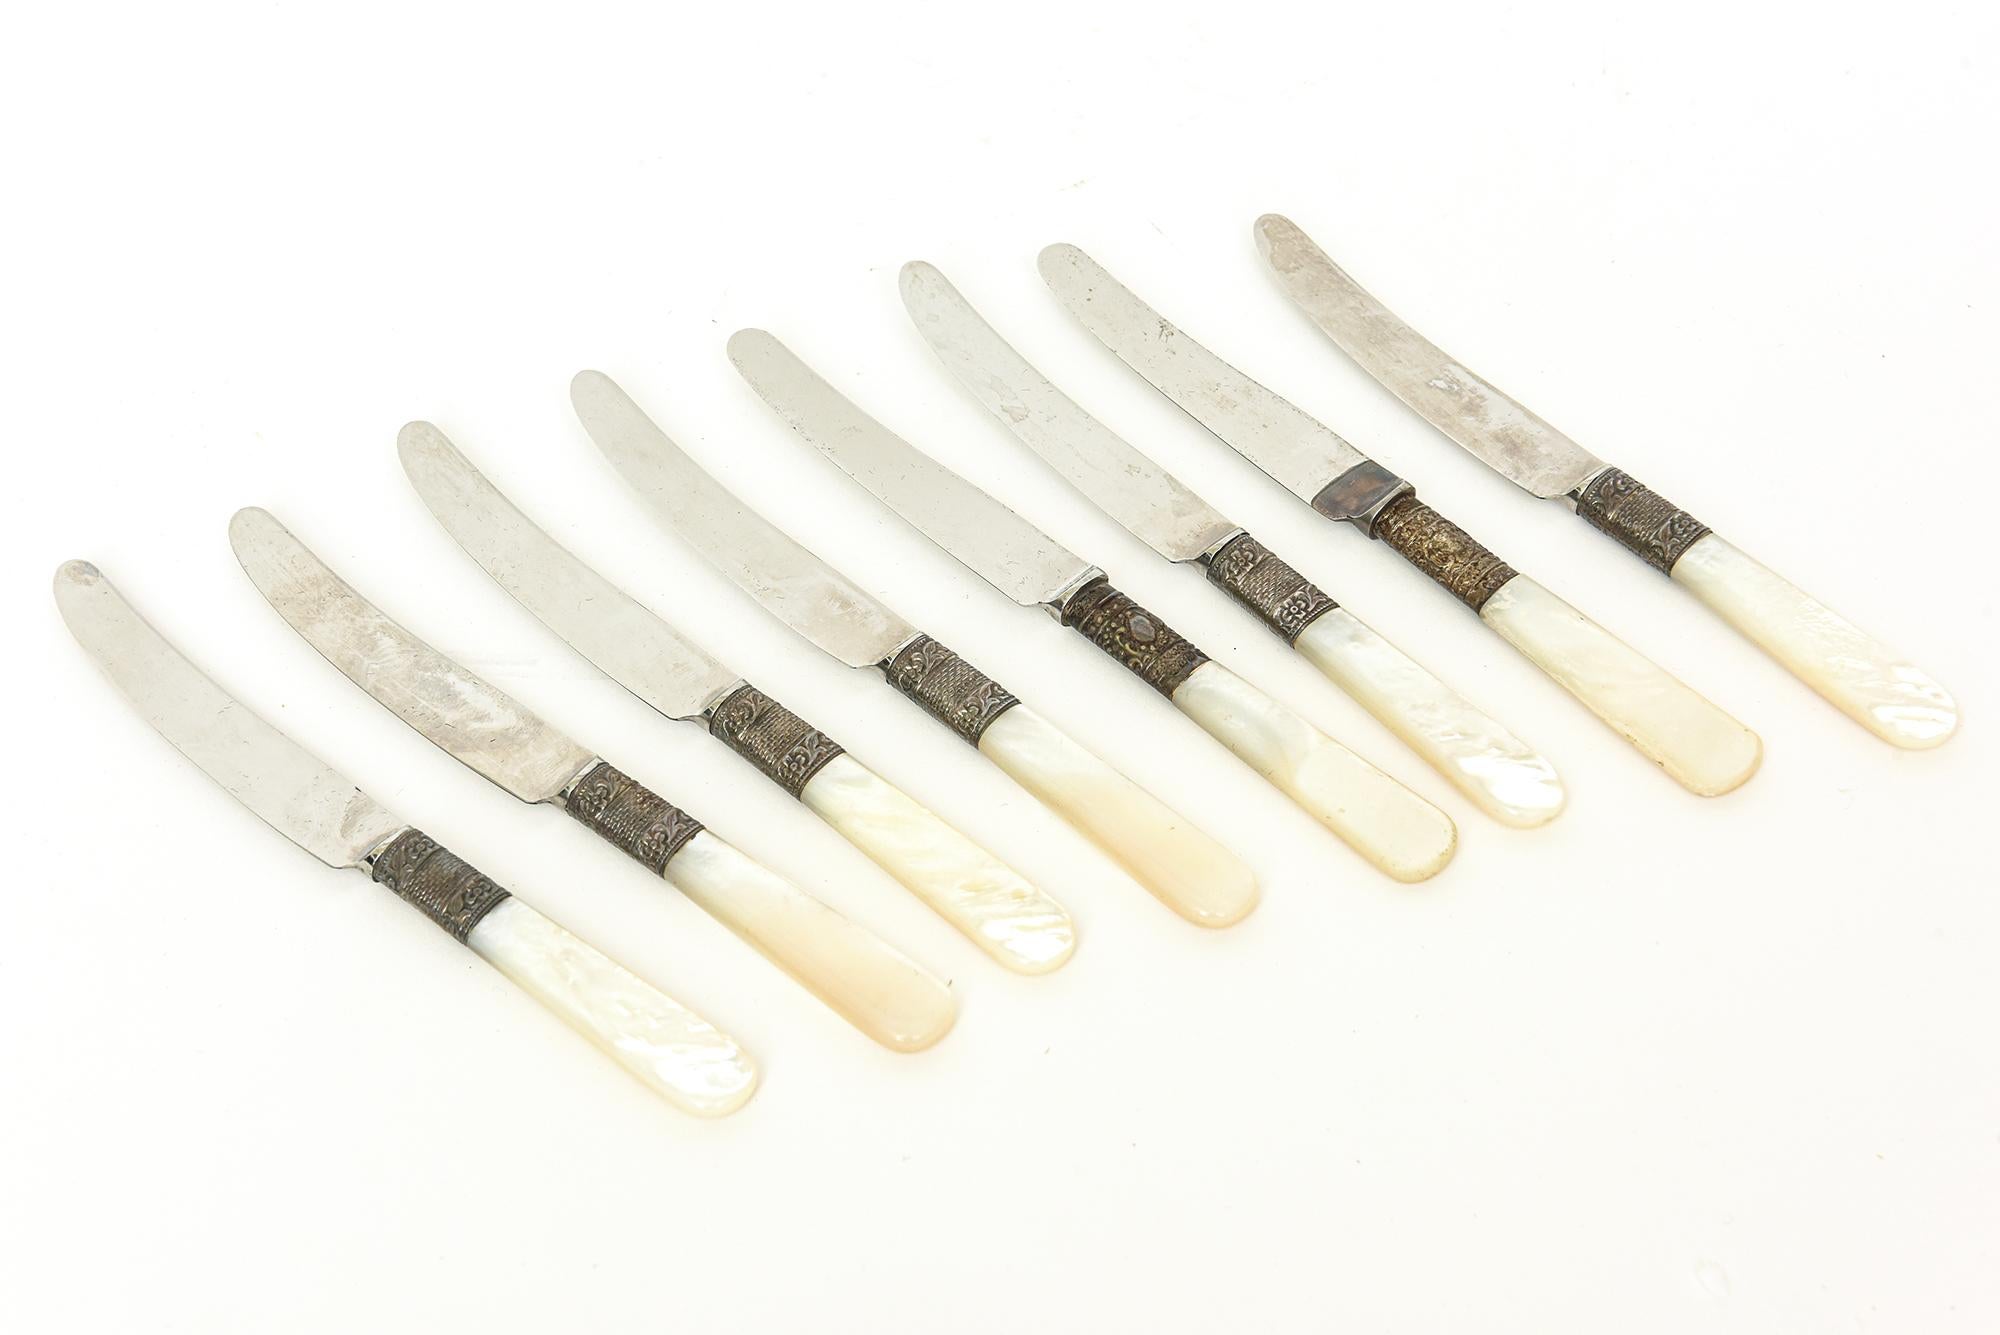  Vintage Mother of Pearl and Stainless Steel Appetizer Knives Set of 8 In Good Condition For Sale In North Miami, FL